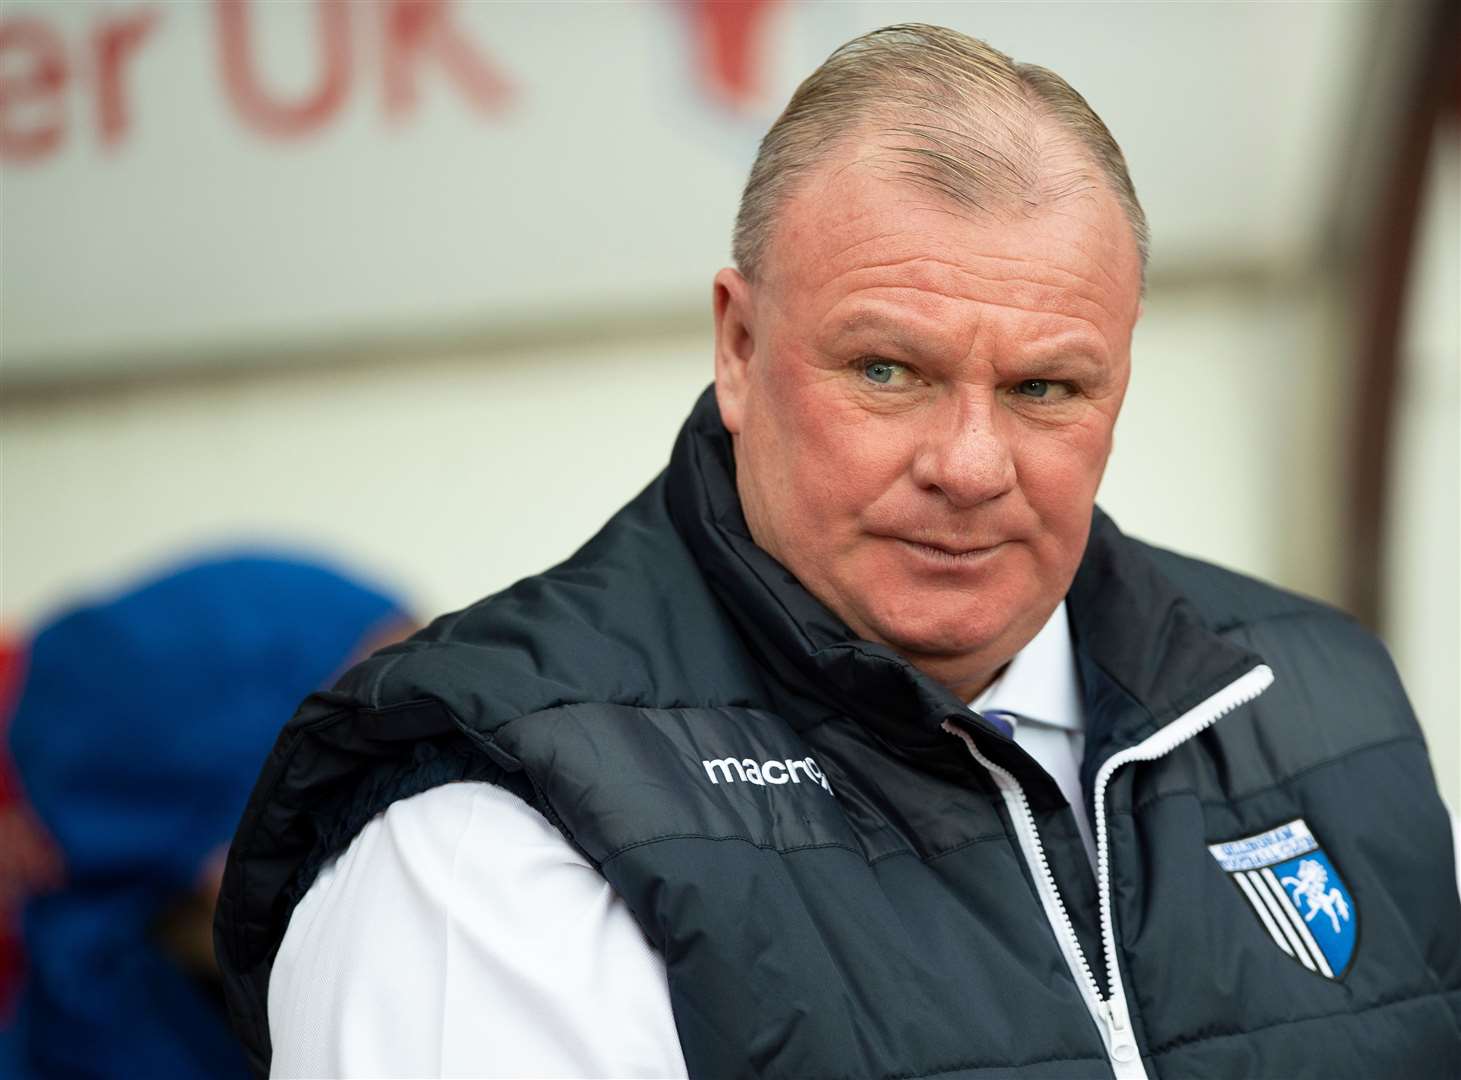 Gillingham put a run of defeats behind them to go unbeaten in League 1 during November